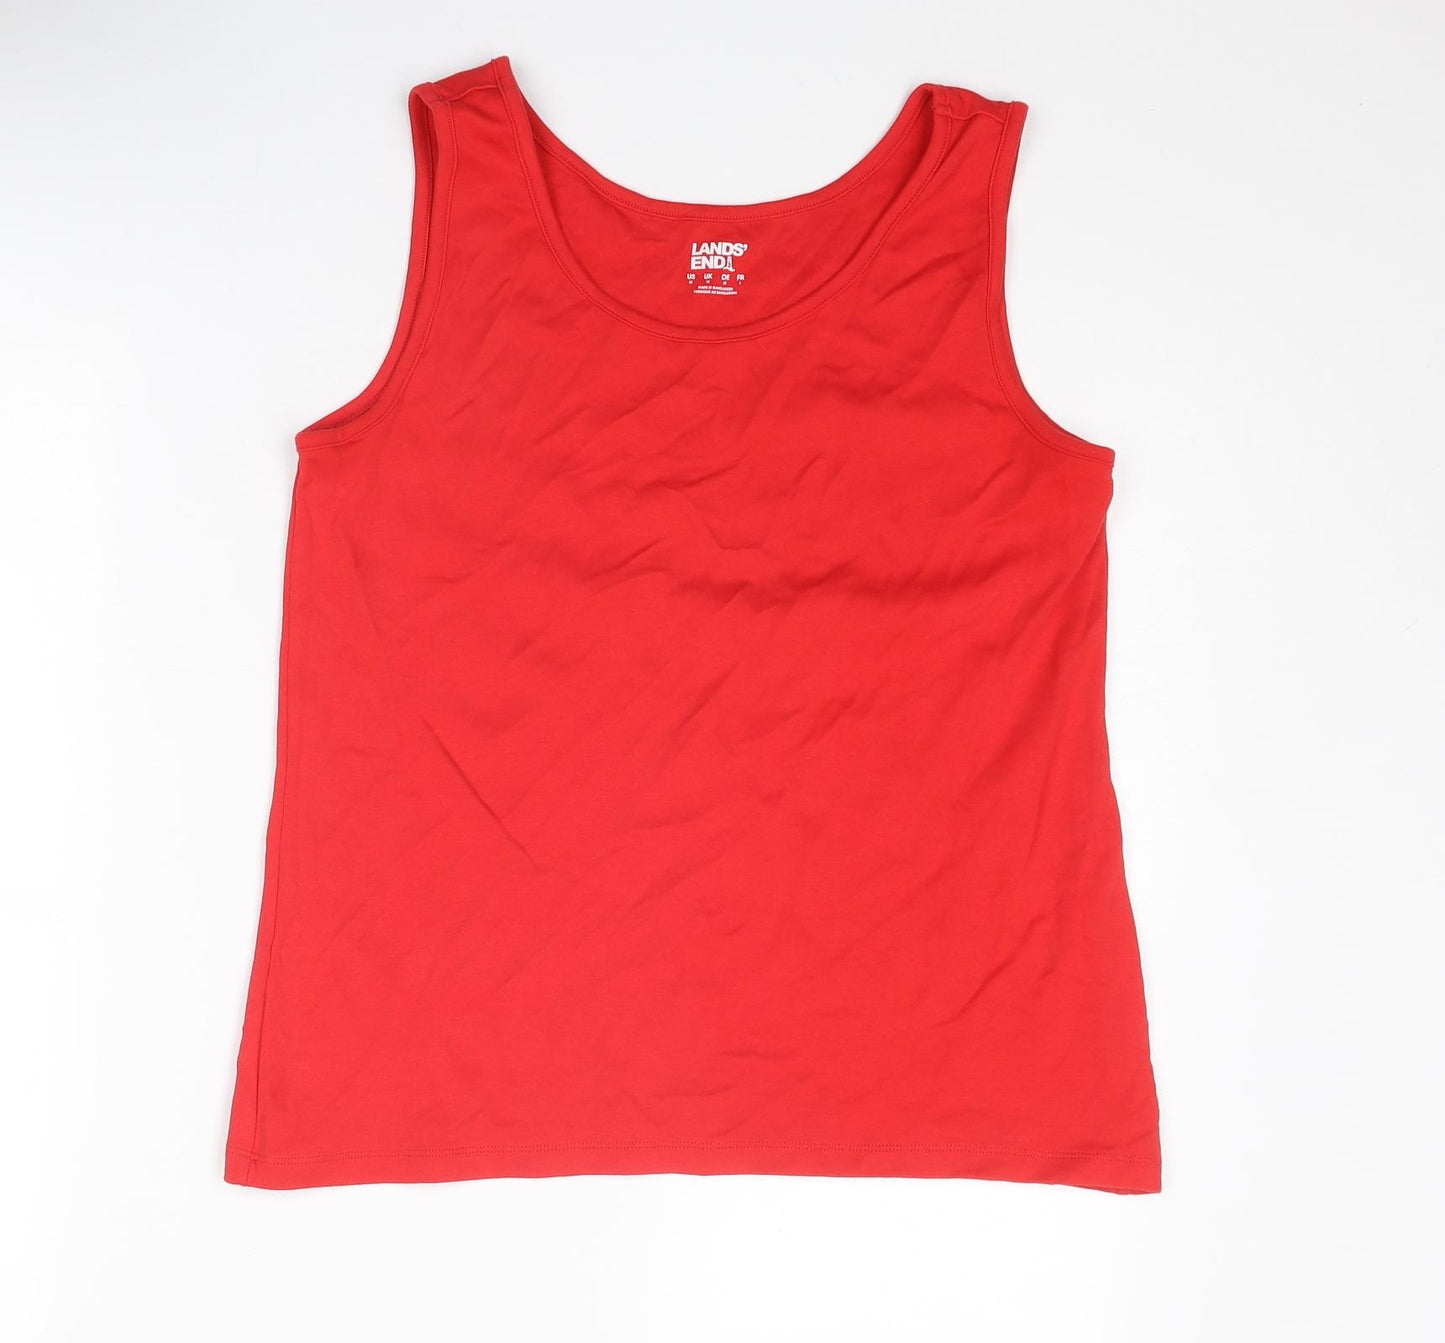 Lands' End Womens Red Cotton Basic Tank Size M Boat Neck